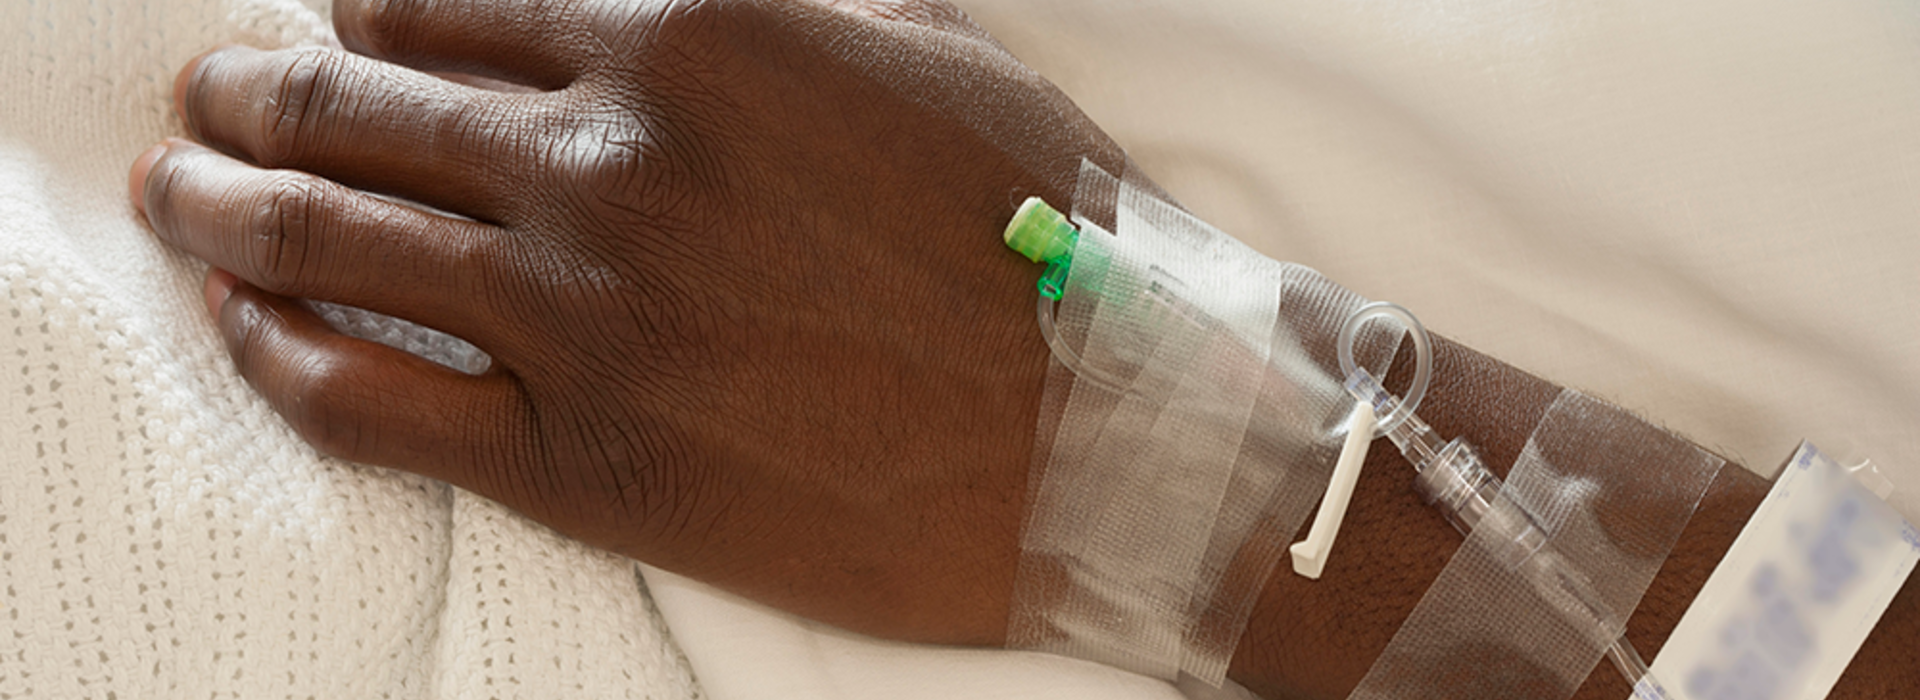 A Black man's hand with an IV